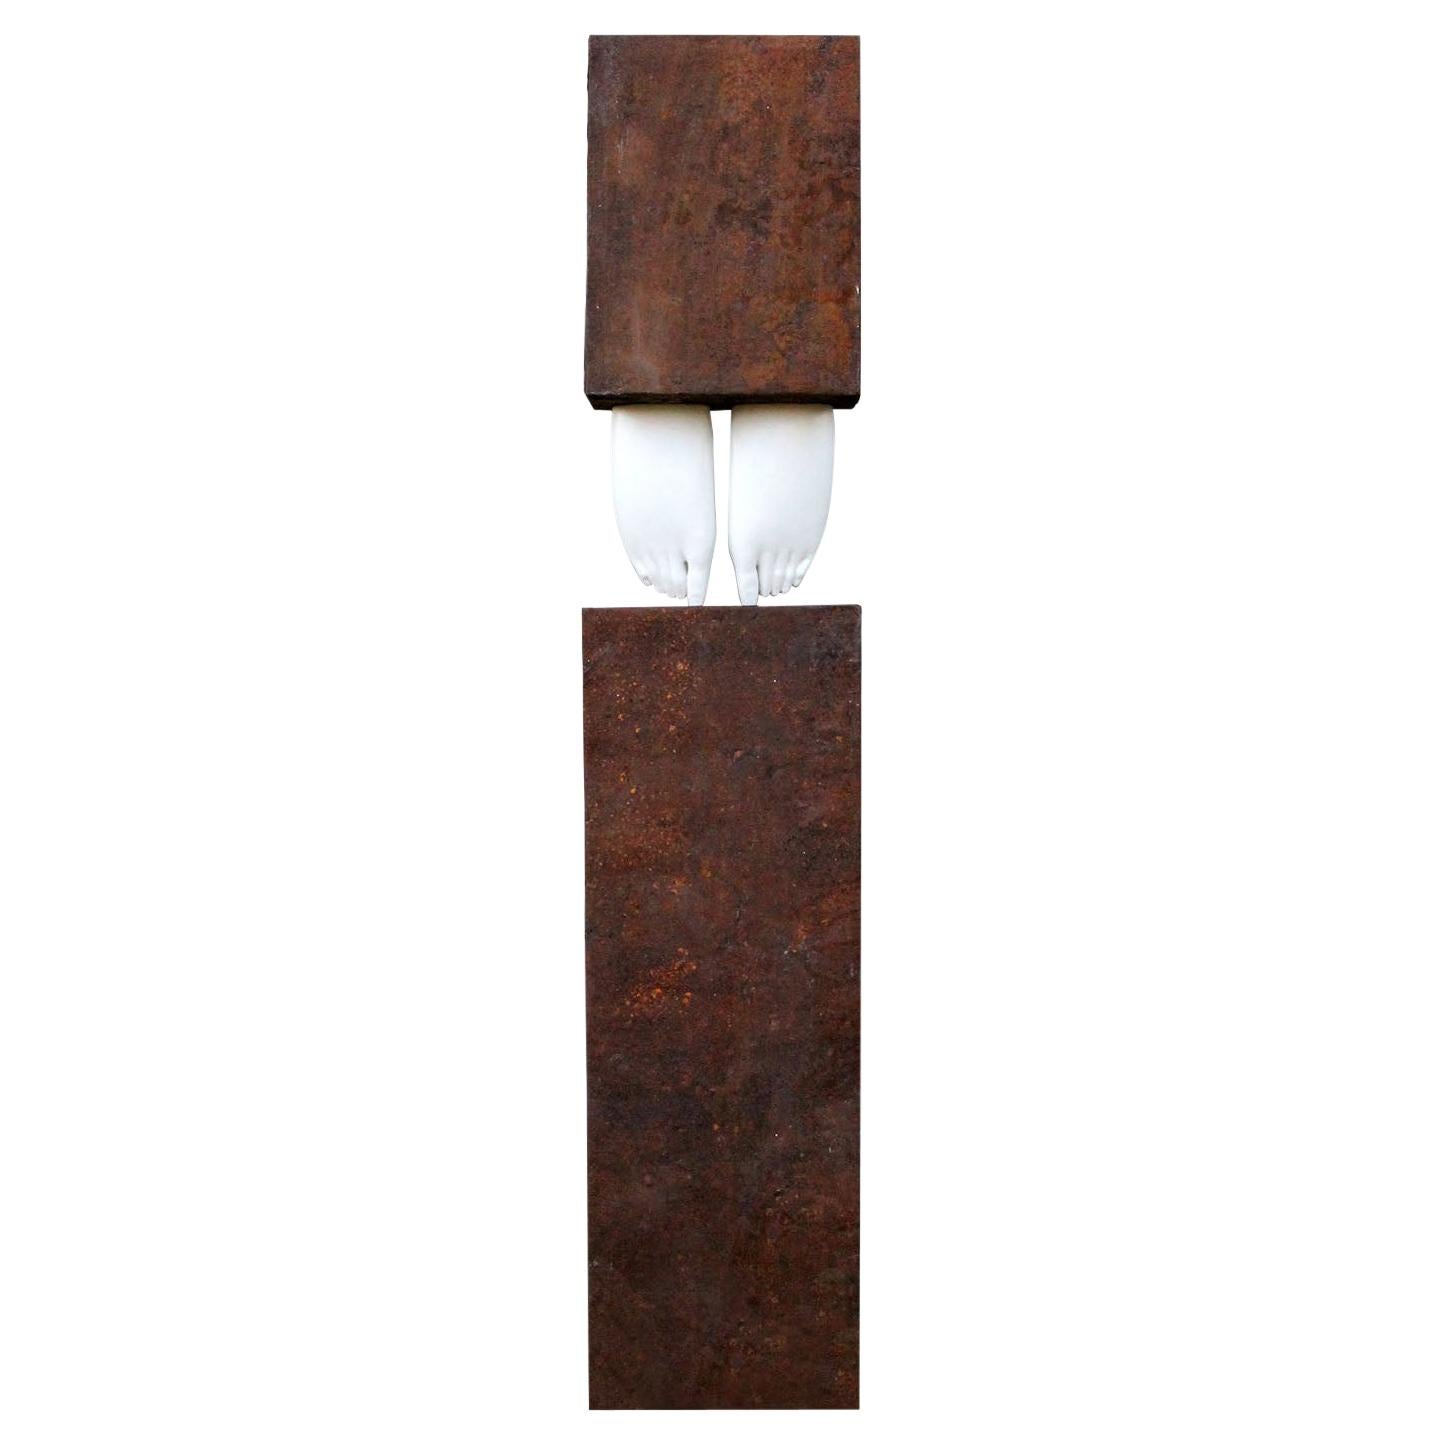 Contemporary Sculpture, TOTEM "Down to Earth", 2015